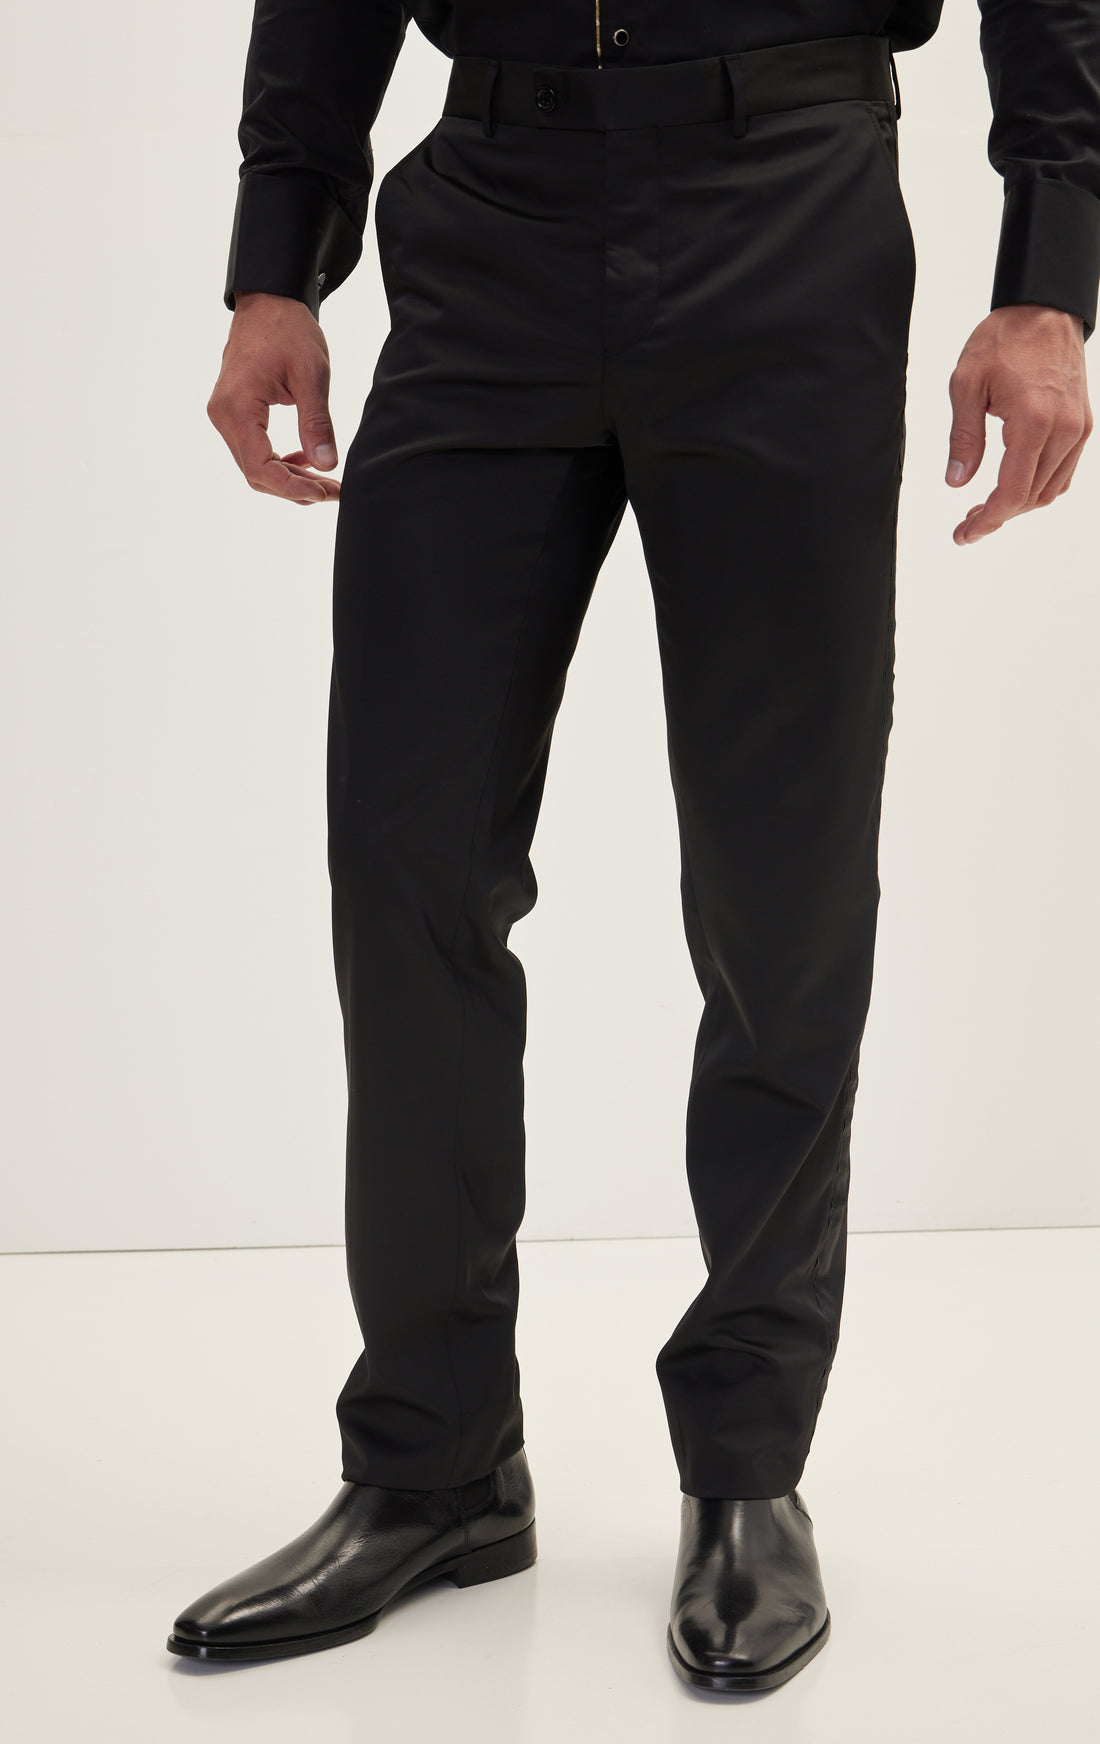 N° TS166 STRIPED FITTED TUXEDO PANTS